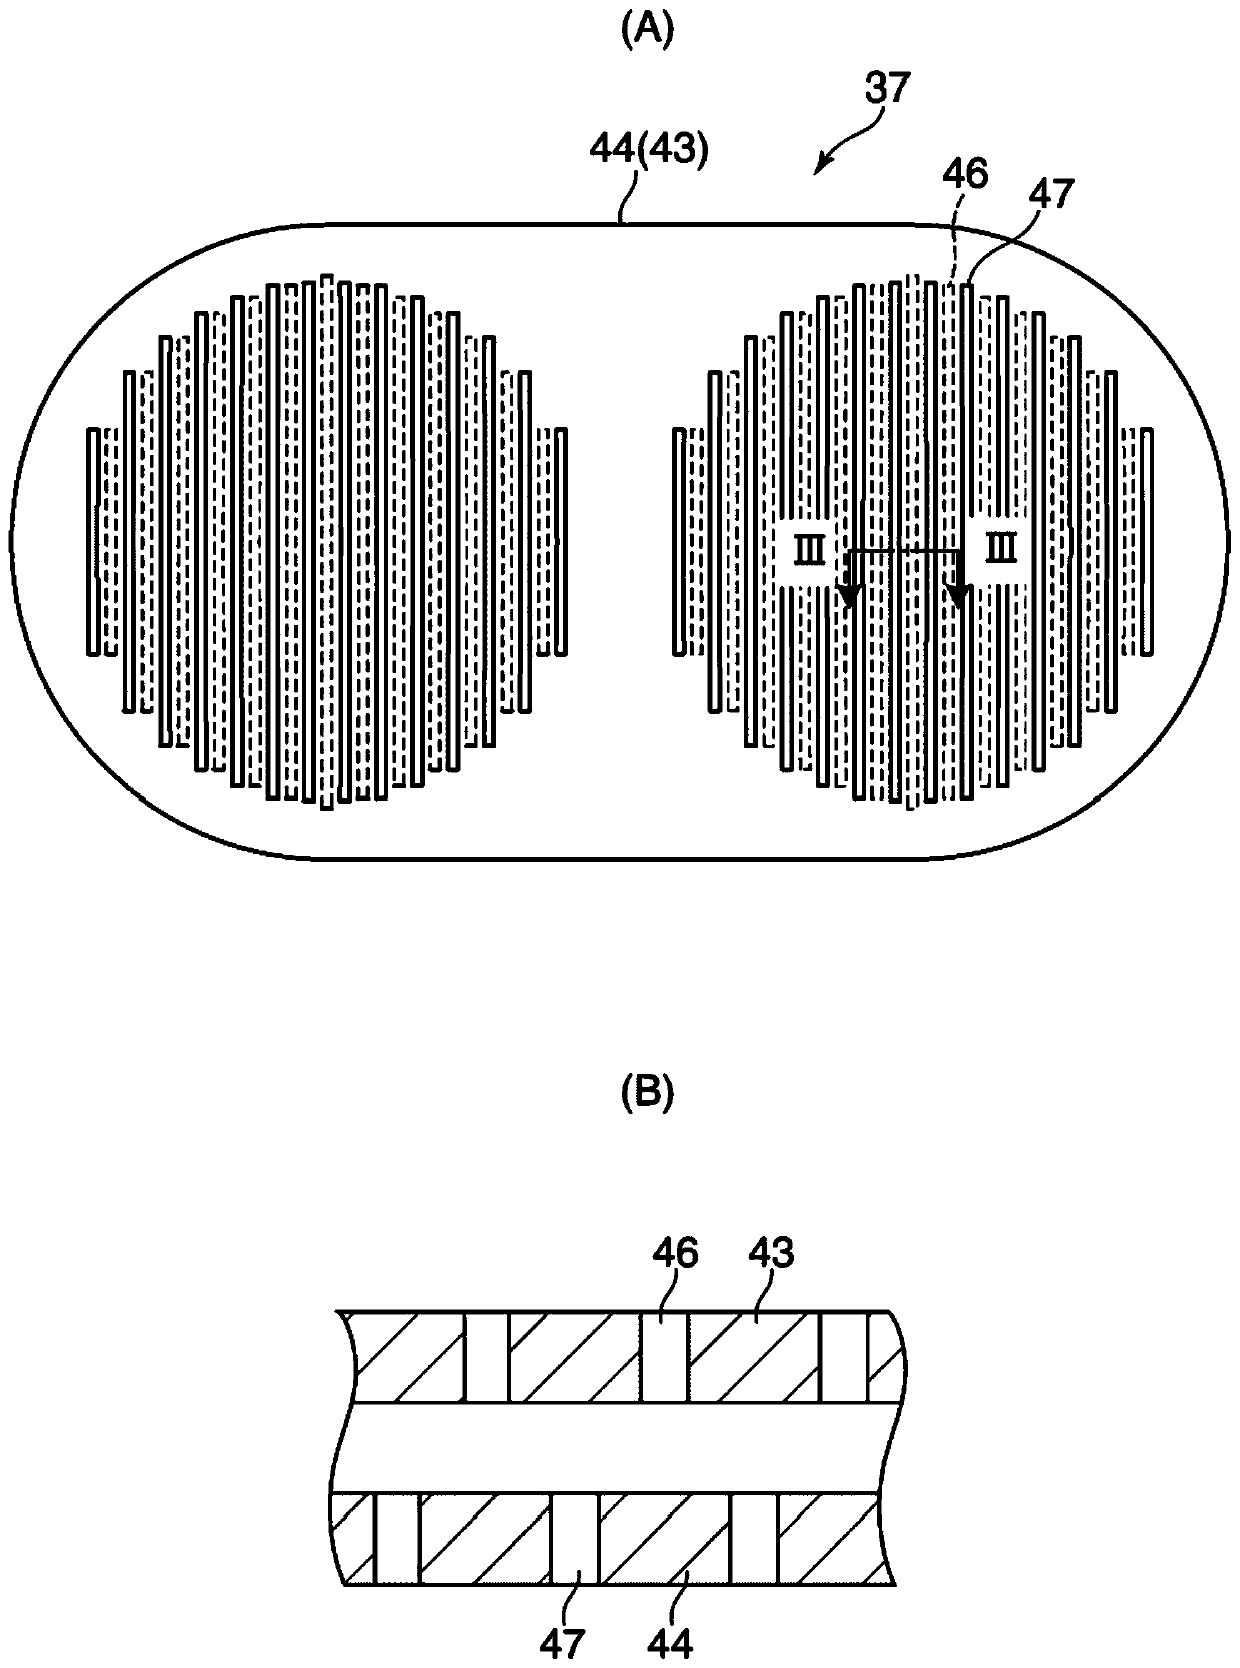 Substrate handling equipment and heat shields